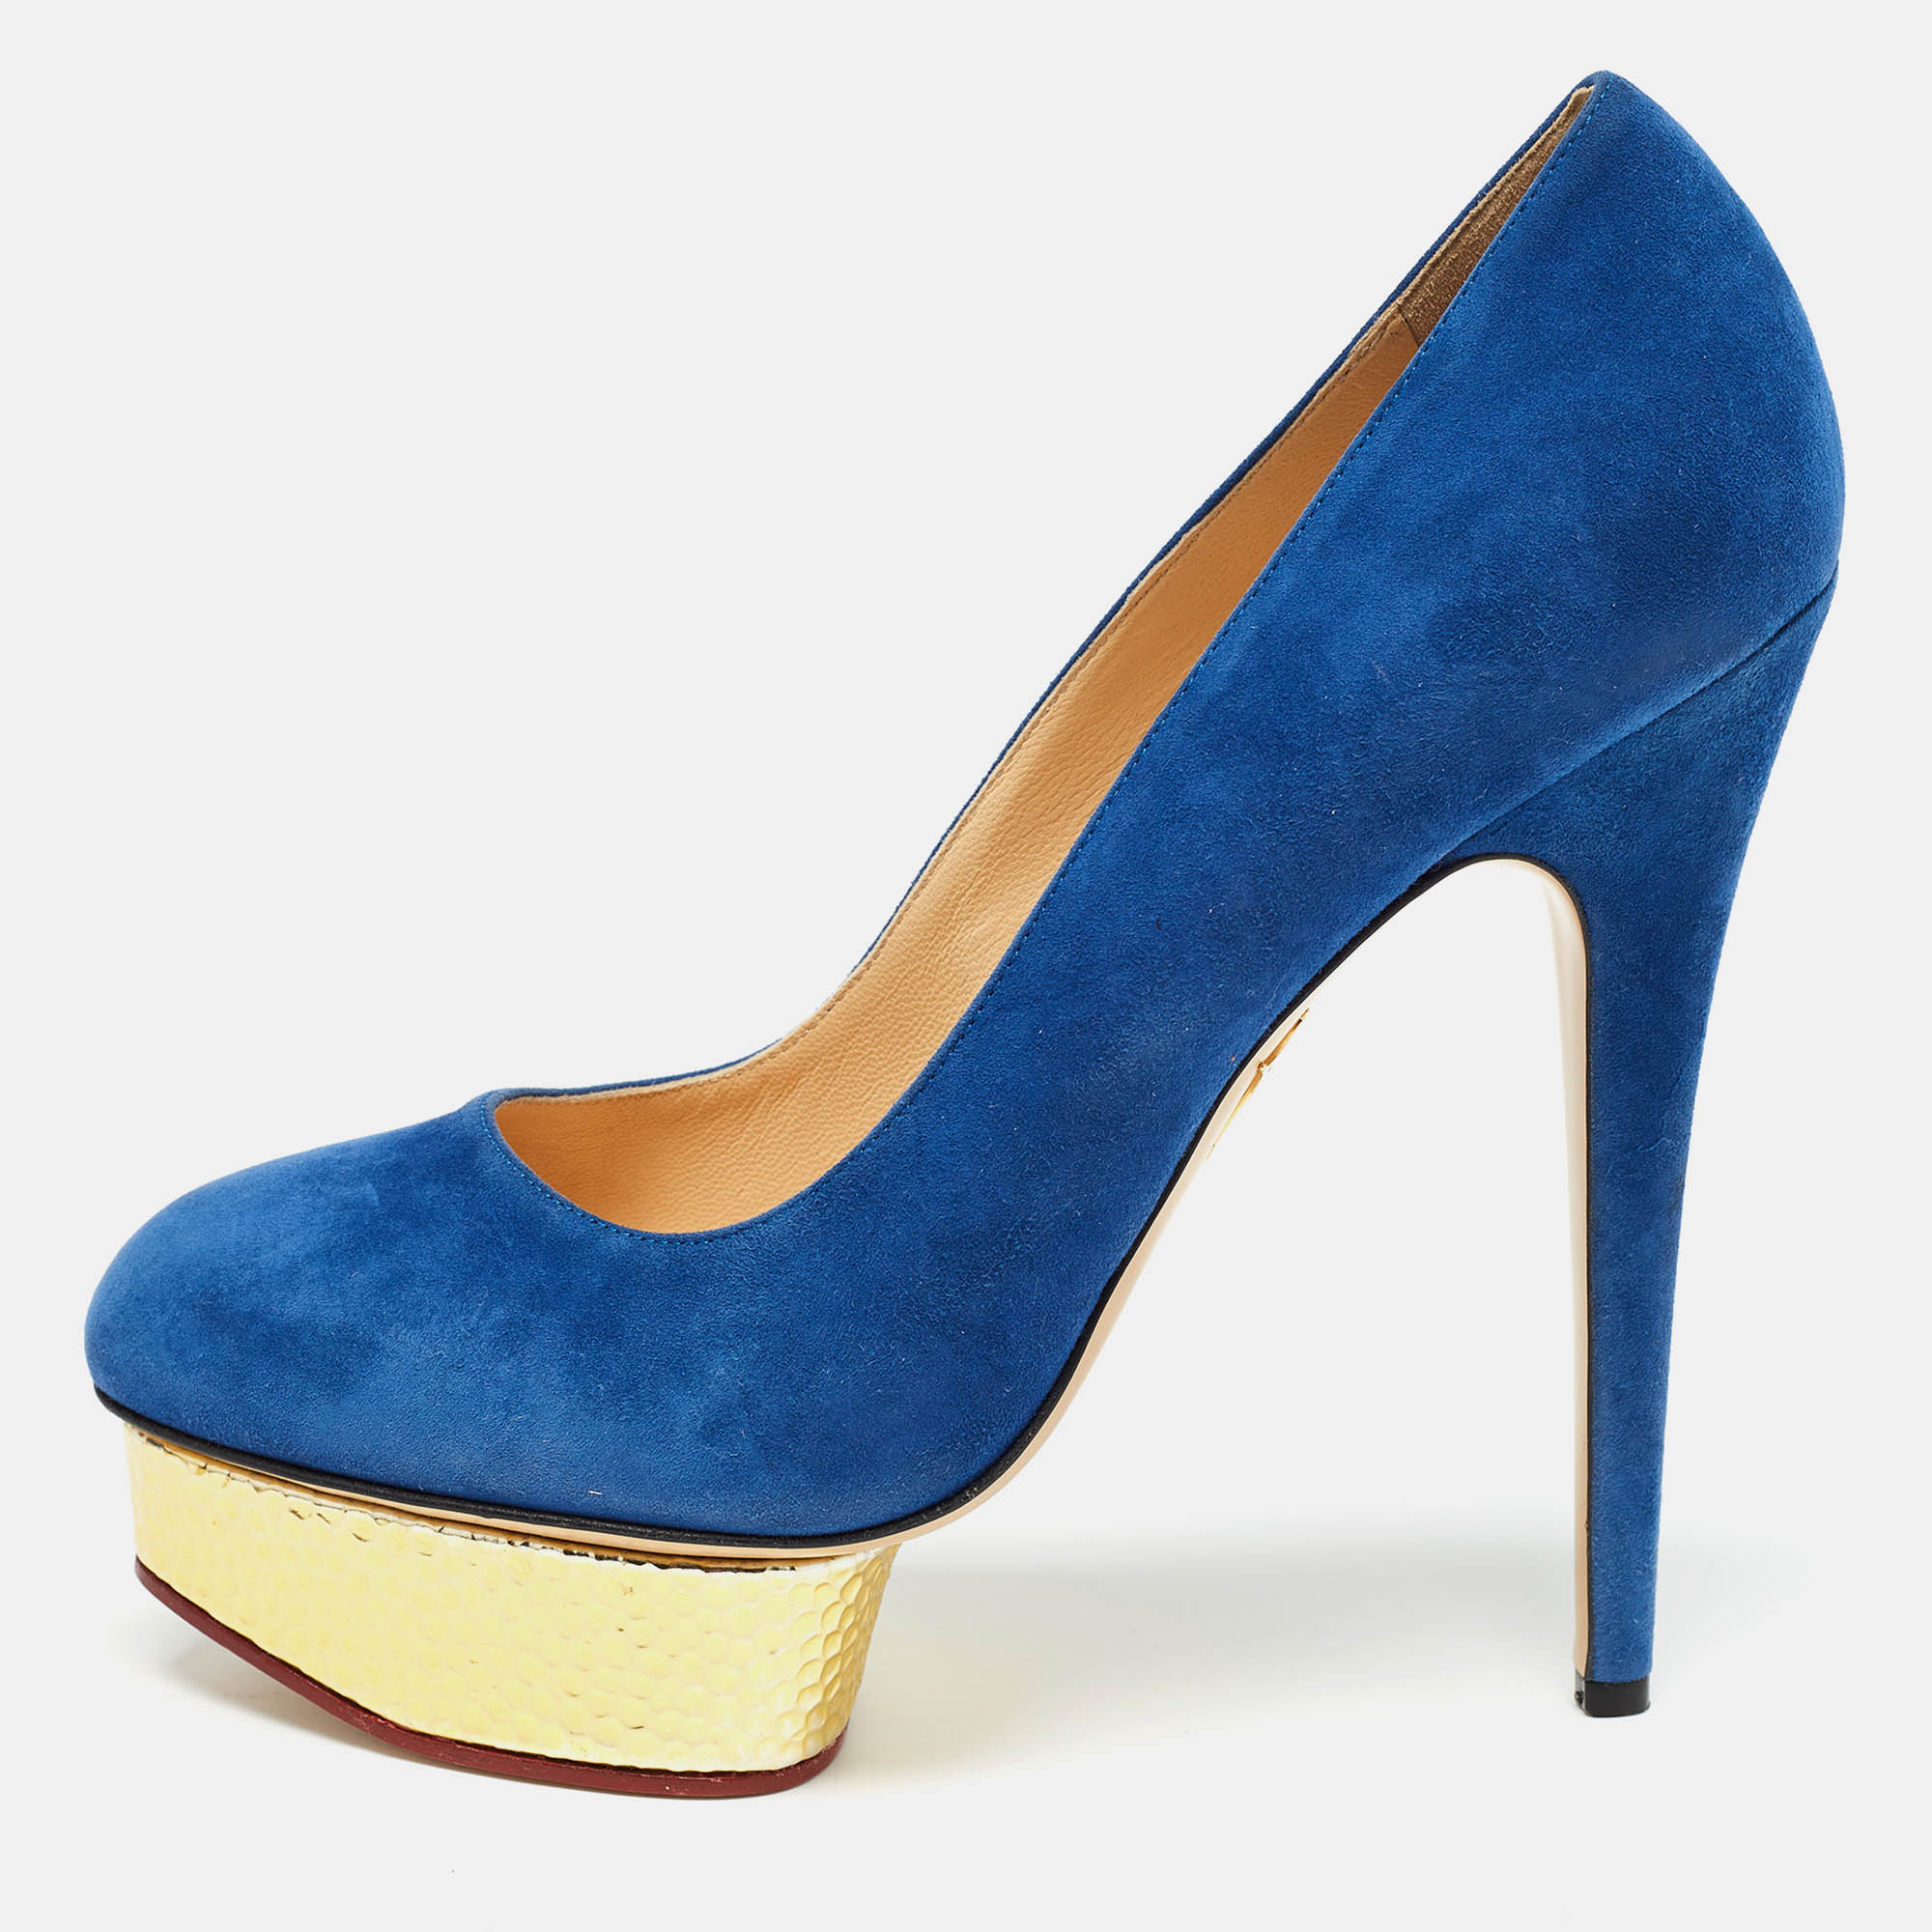 Charlotte olympia blue suede dolly pumps size 41